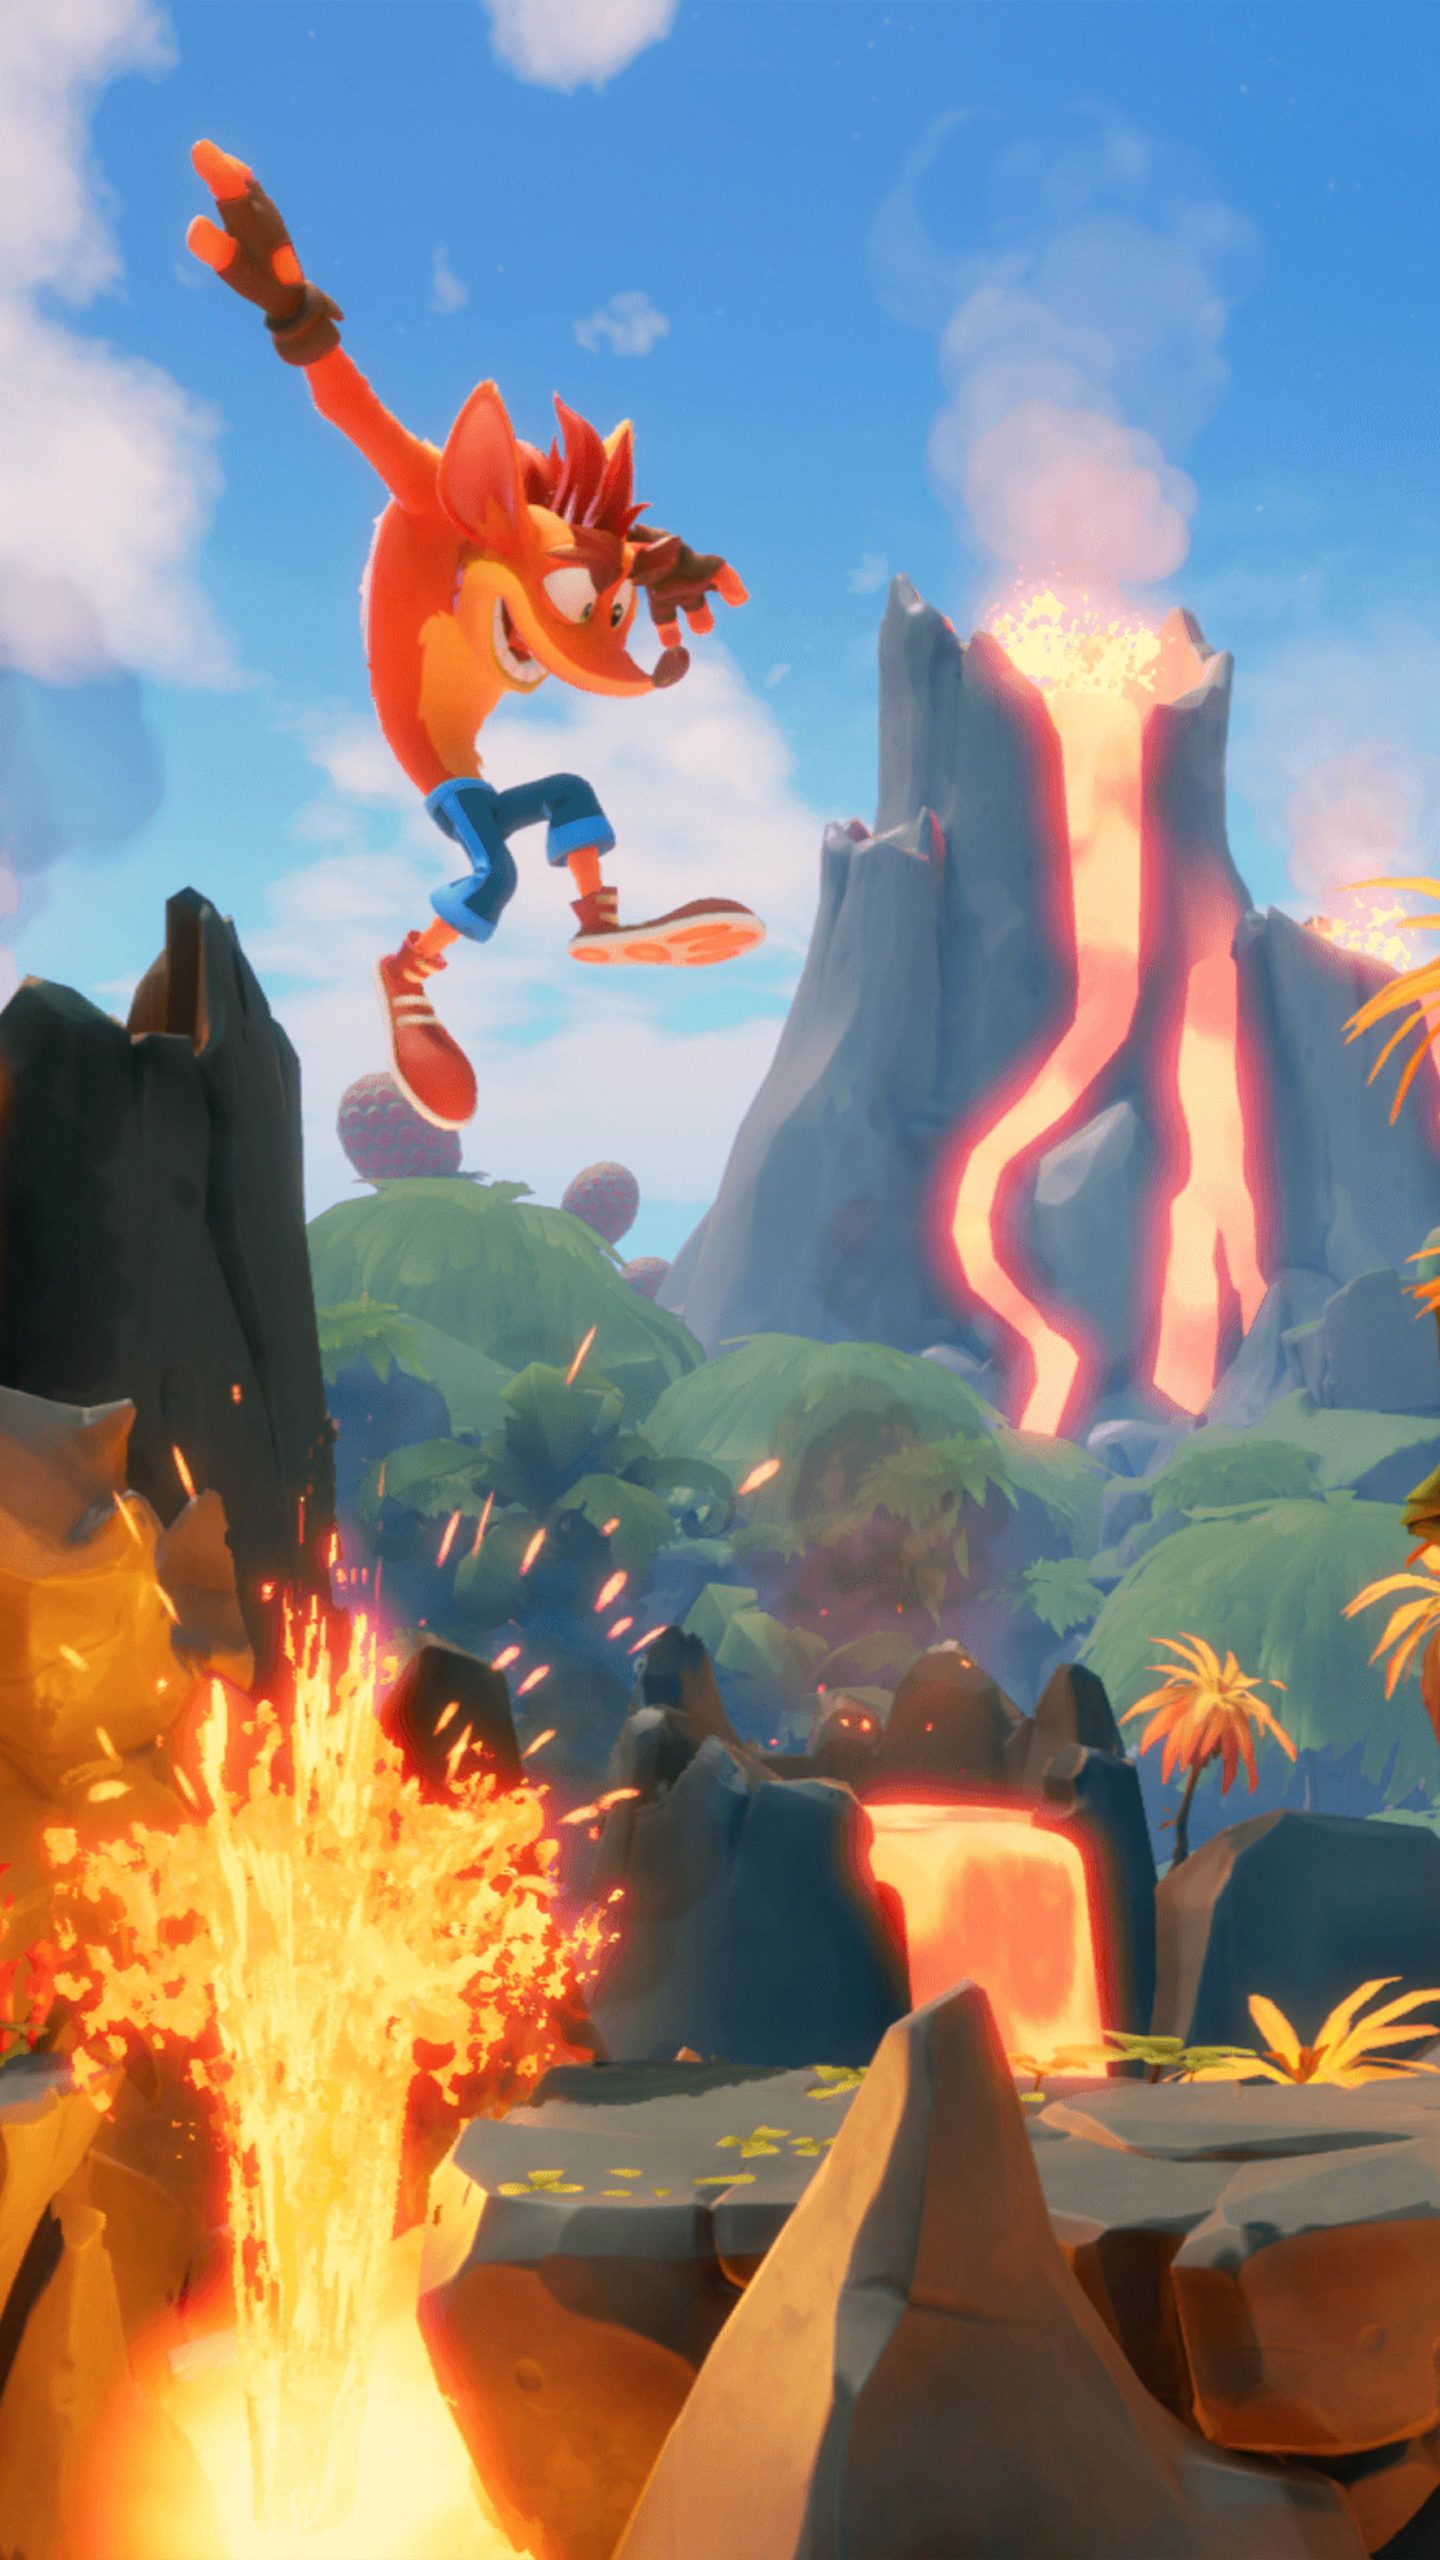 Crash Bandicoot 4: It's About Time Wallpapers - Wallpaper Cave